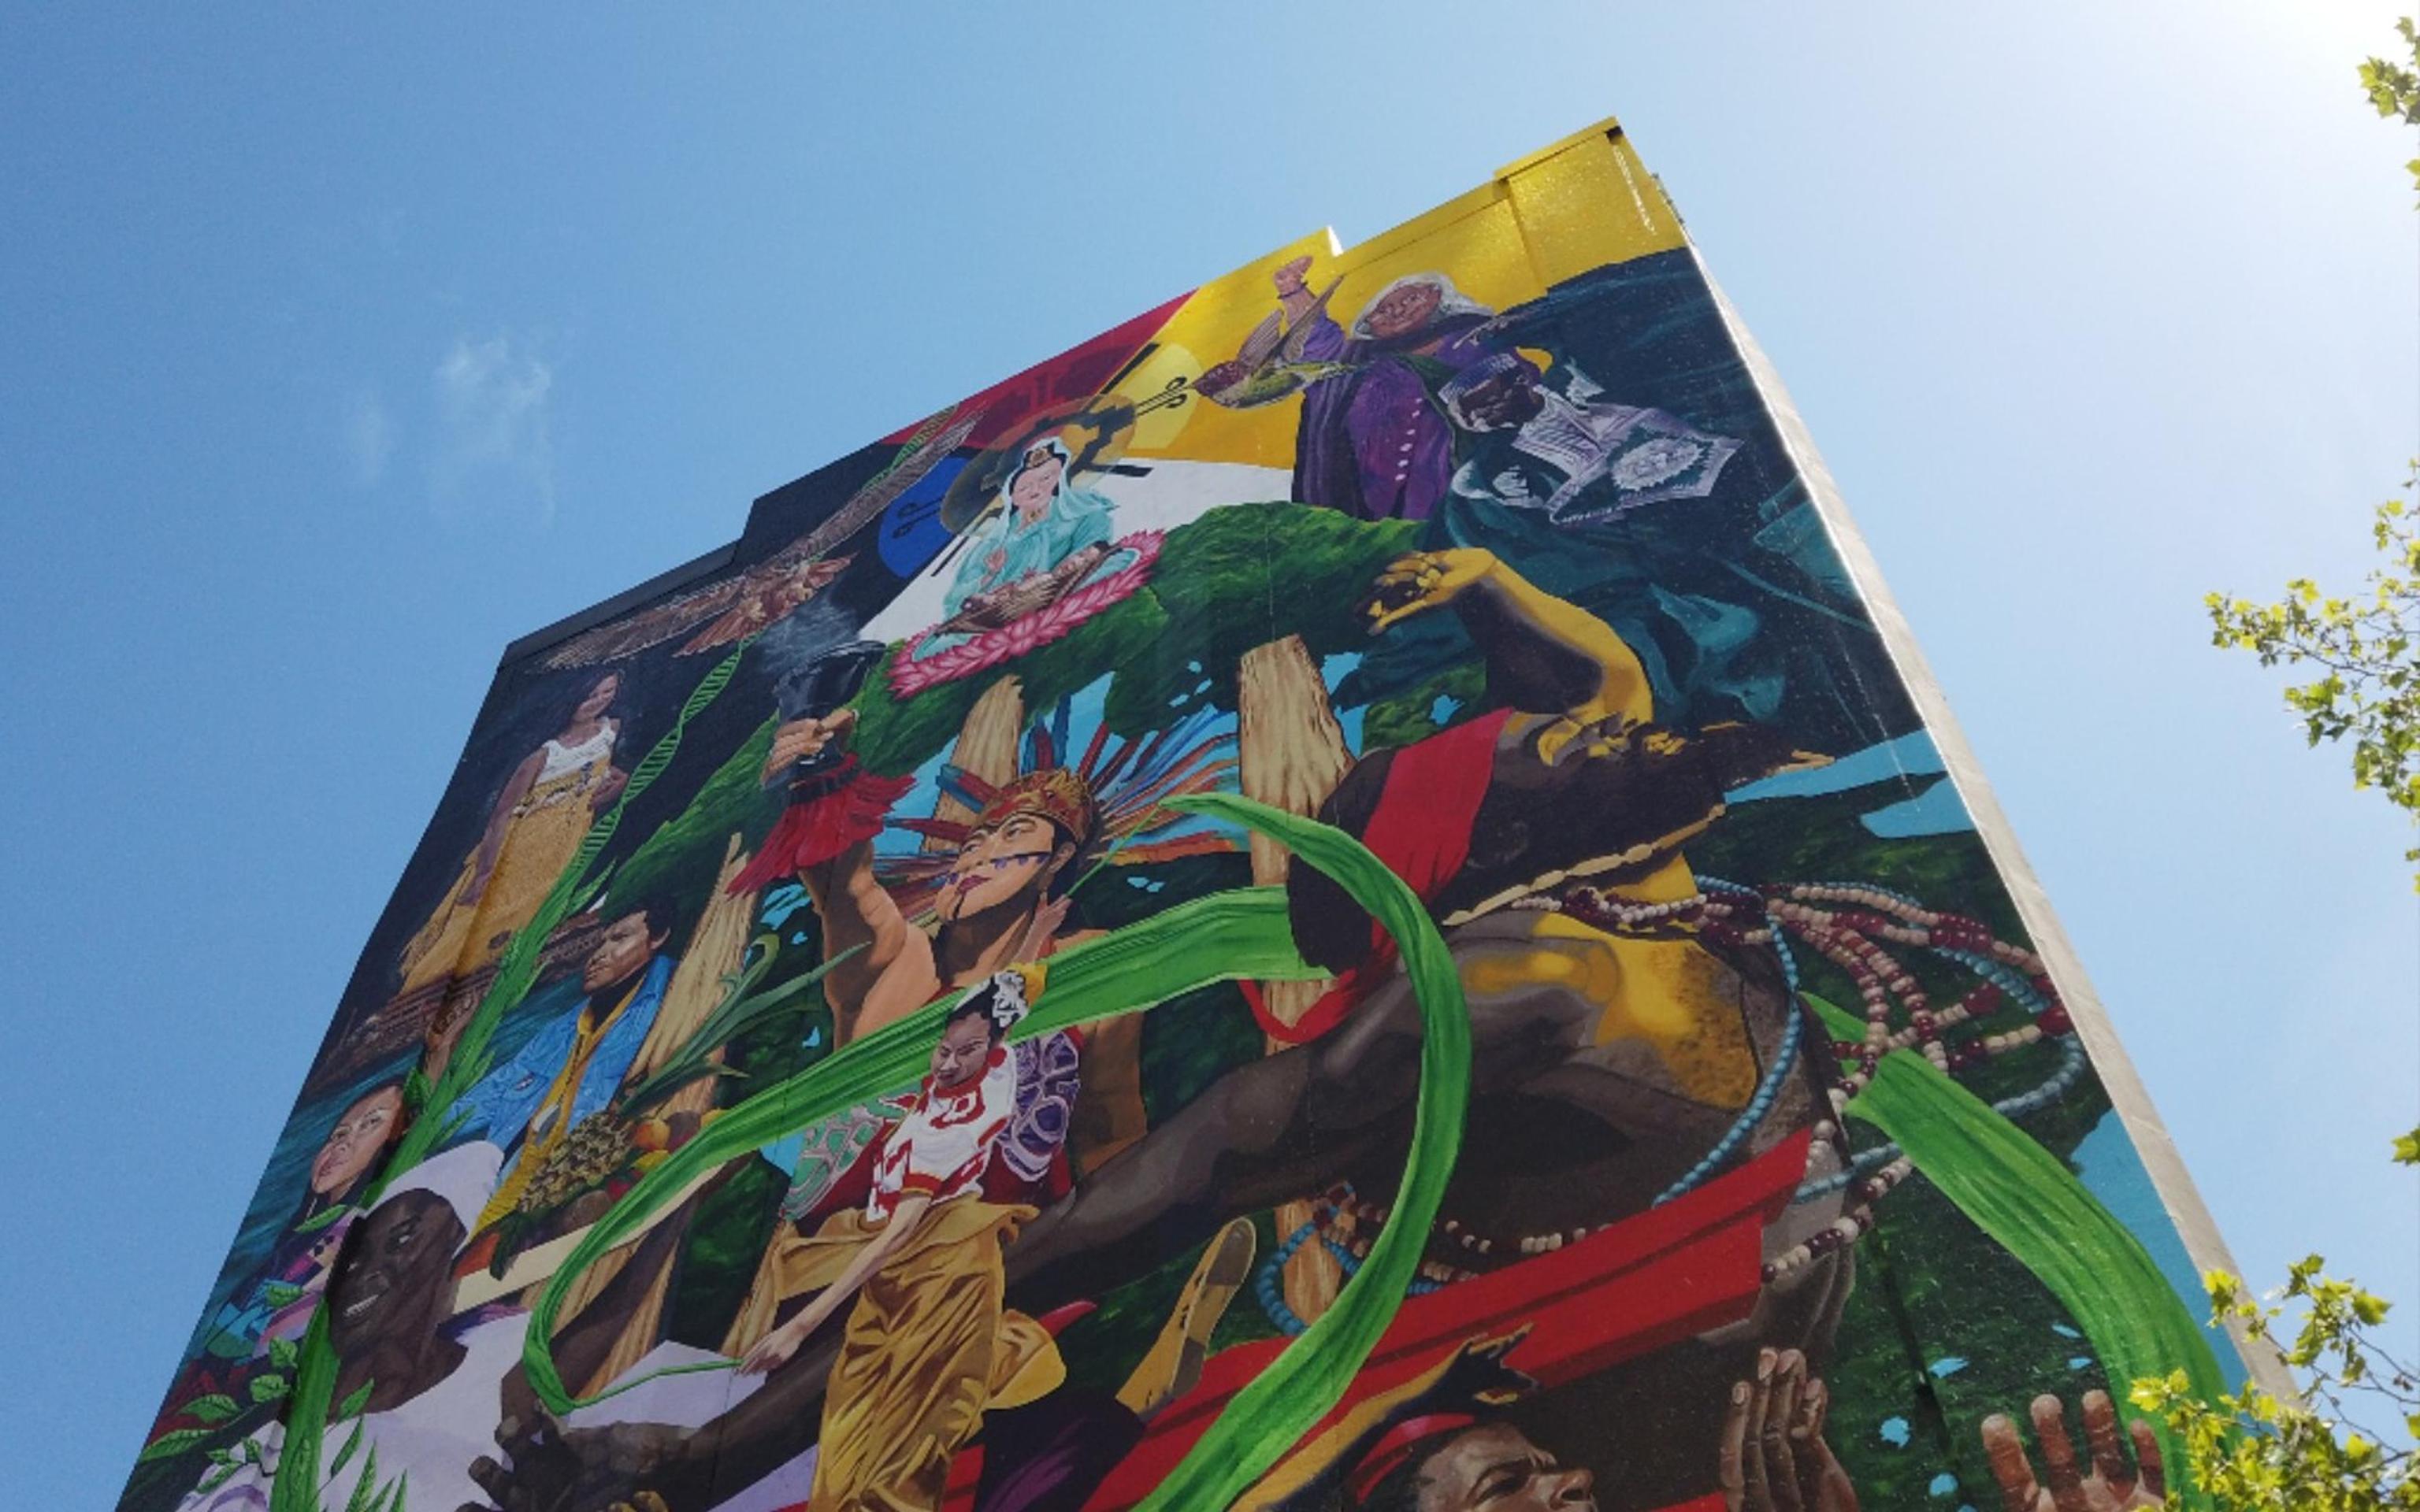 Migration allows people to adapt and survive. It also transforms a city into a community. Walk through downtown Oakland to uncover these interconnected migration stories.

Created in the Summer of 2021